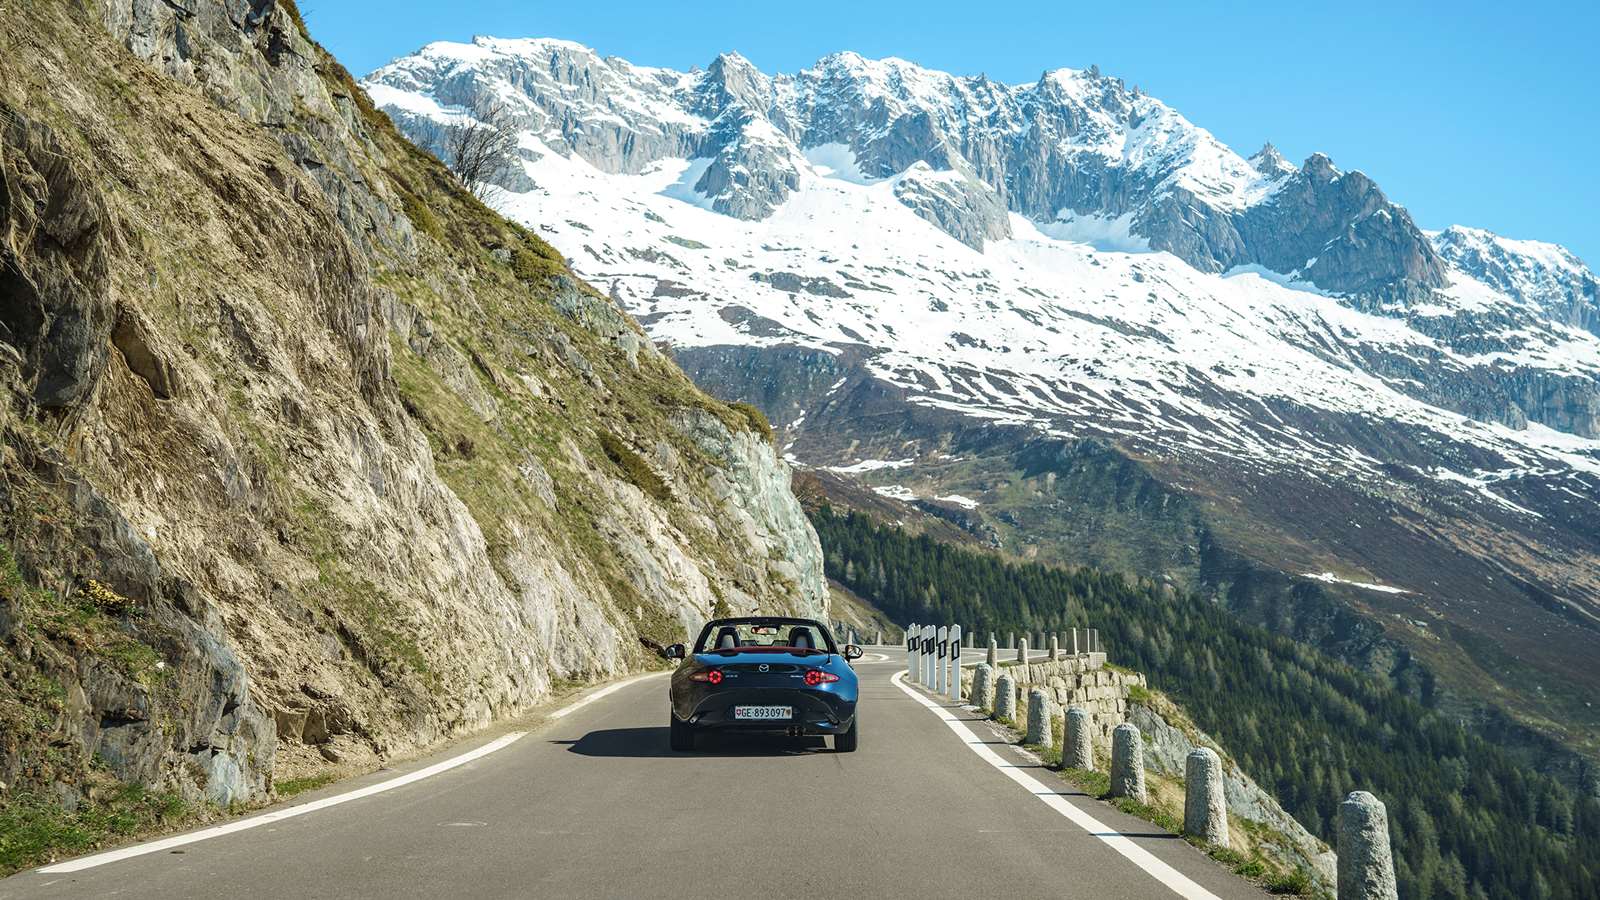 List of the Top 10 Countries in the World with the Finest Roads